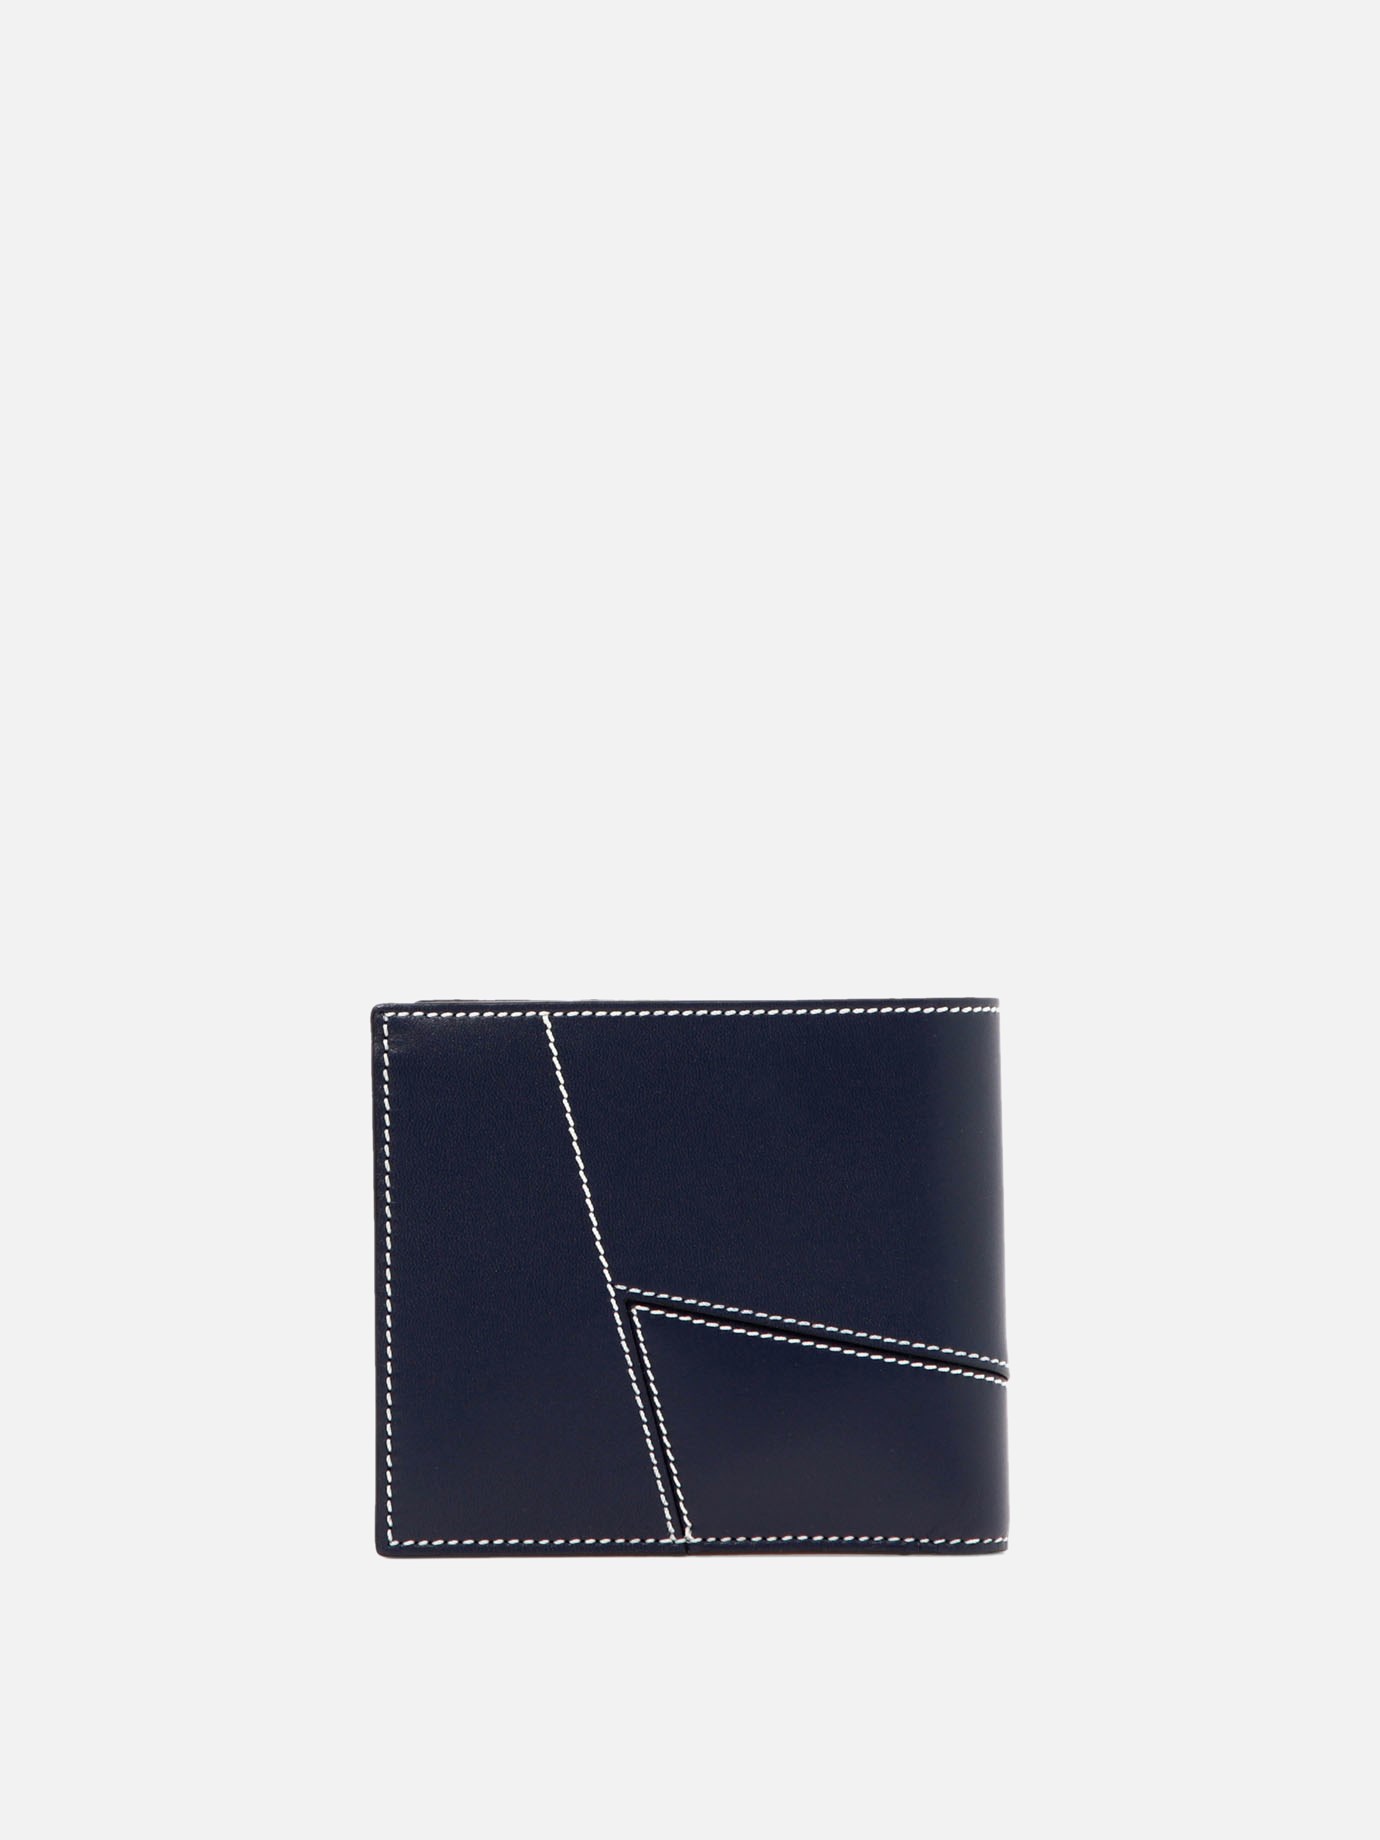  Puzzle Stitches  wallet by Loewe